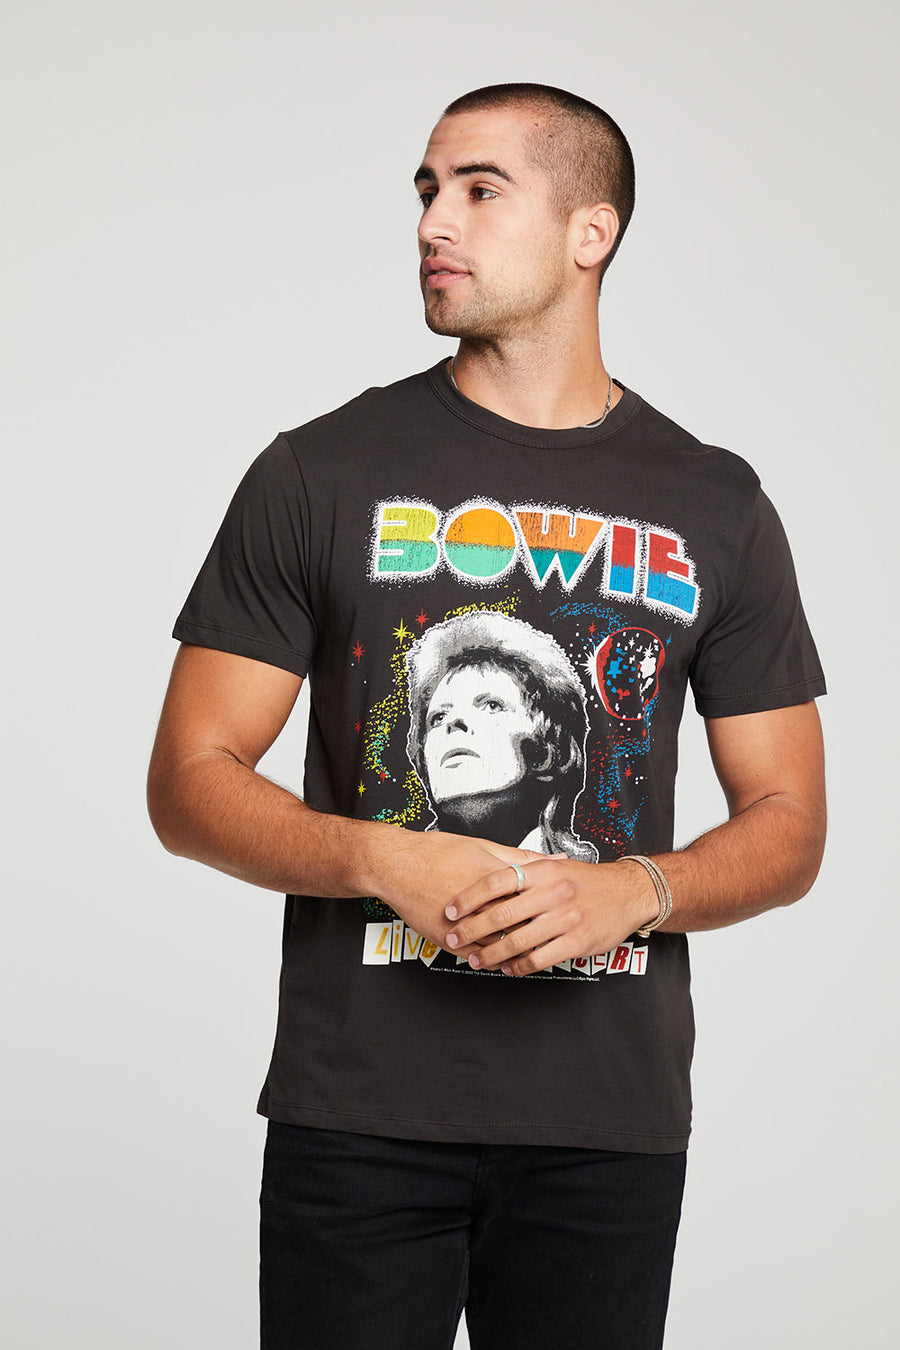 David Bowie Live In Concert MENS chaserbrand